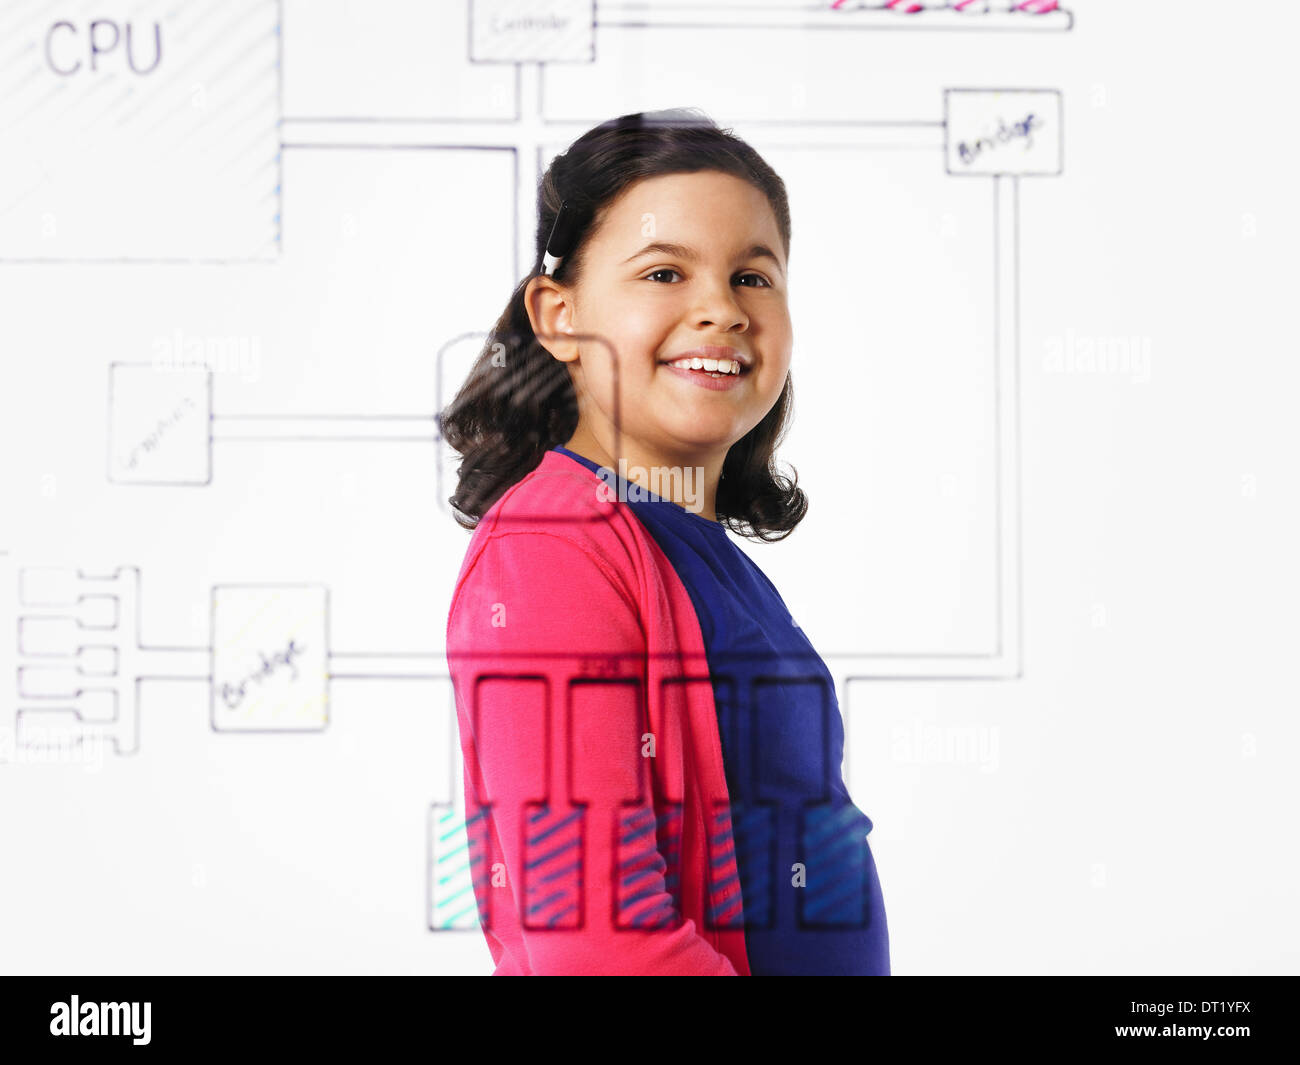 A young girl looking at a drawing of a computer motherboard circuit drawn on a see through clear surface Stock Photo